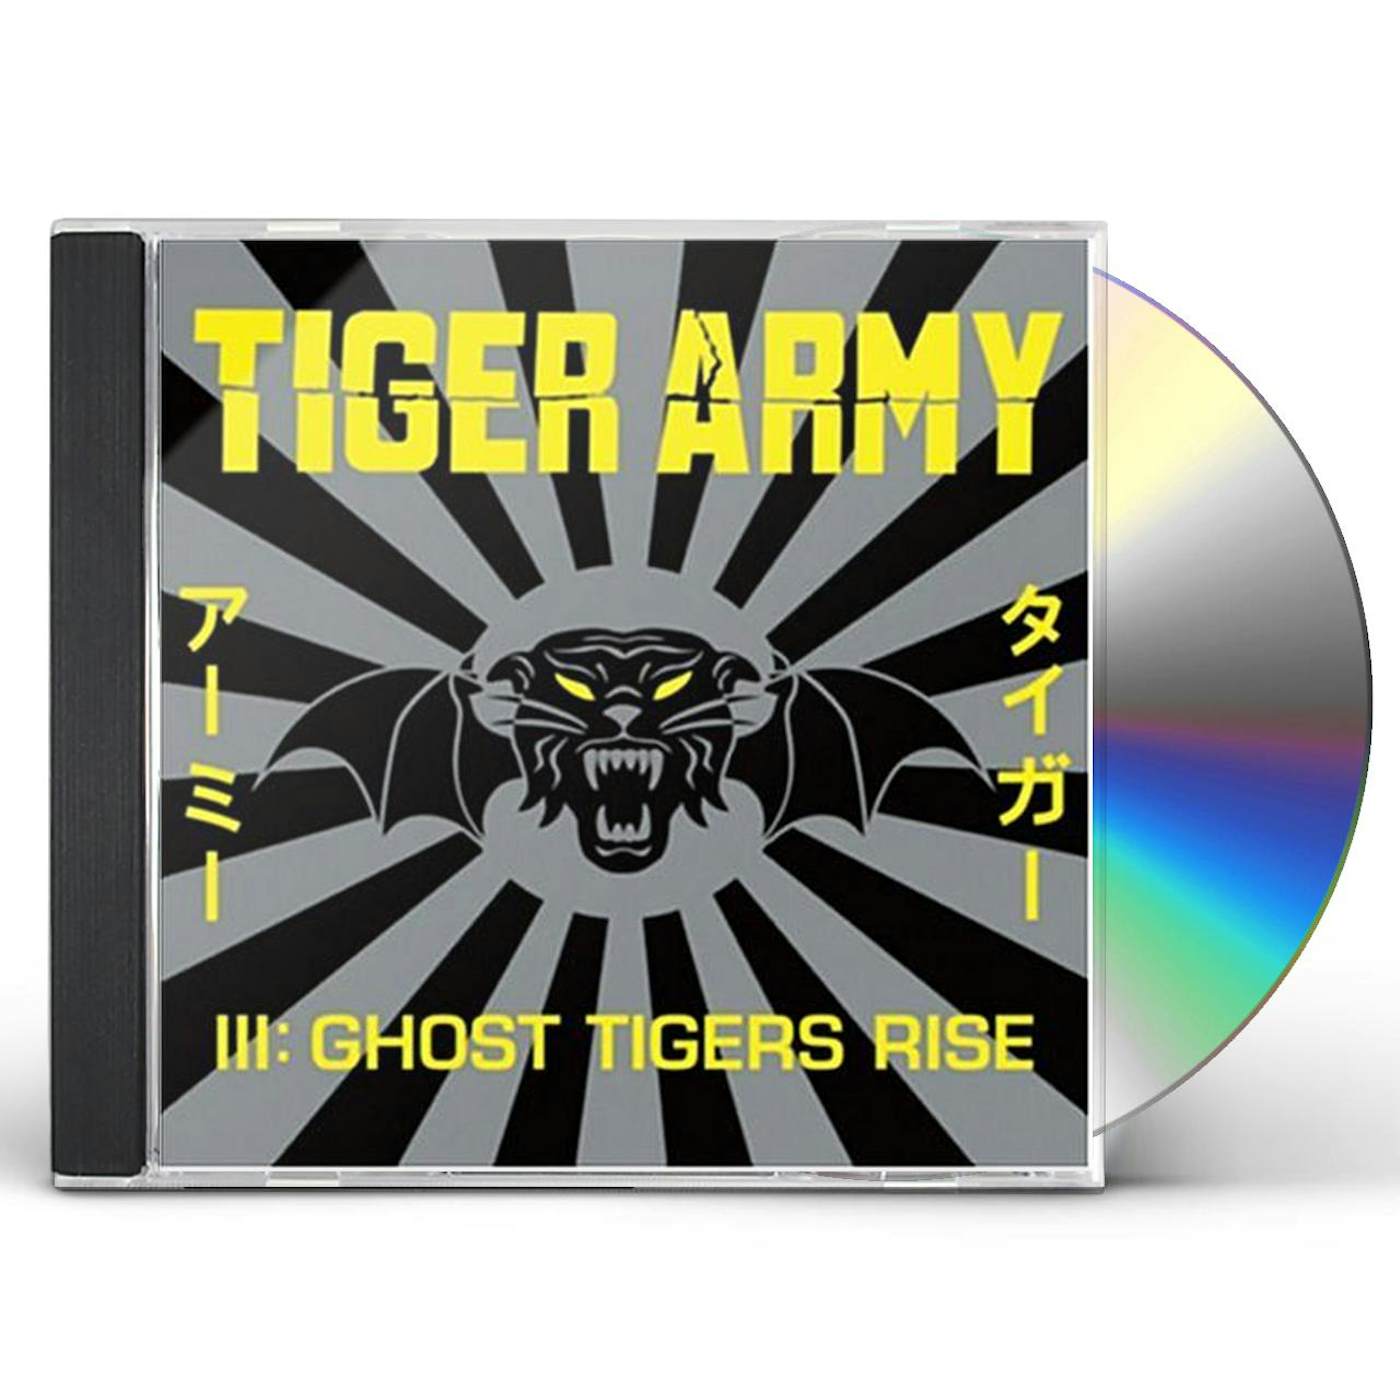 TIGER ARMY III: GHOST TIGERS RISE CD